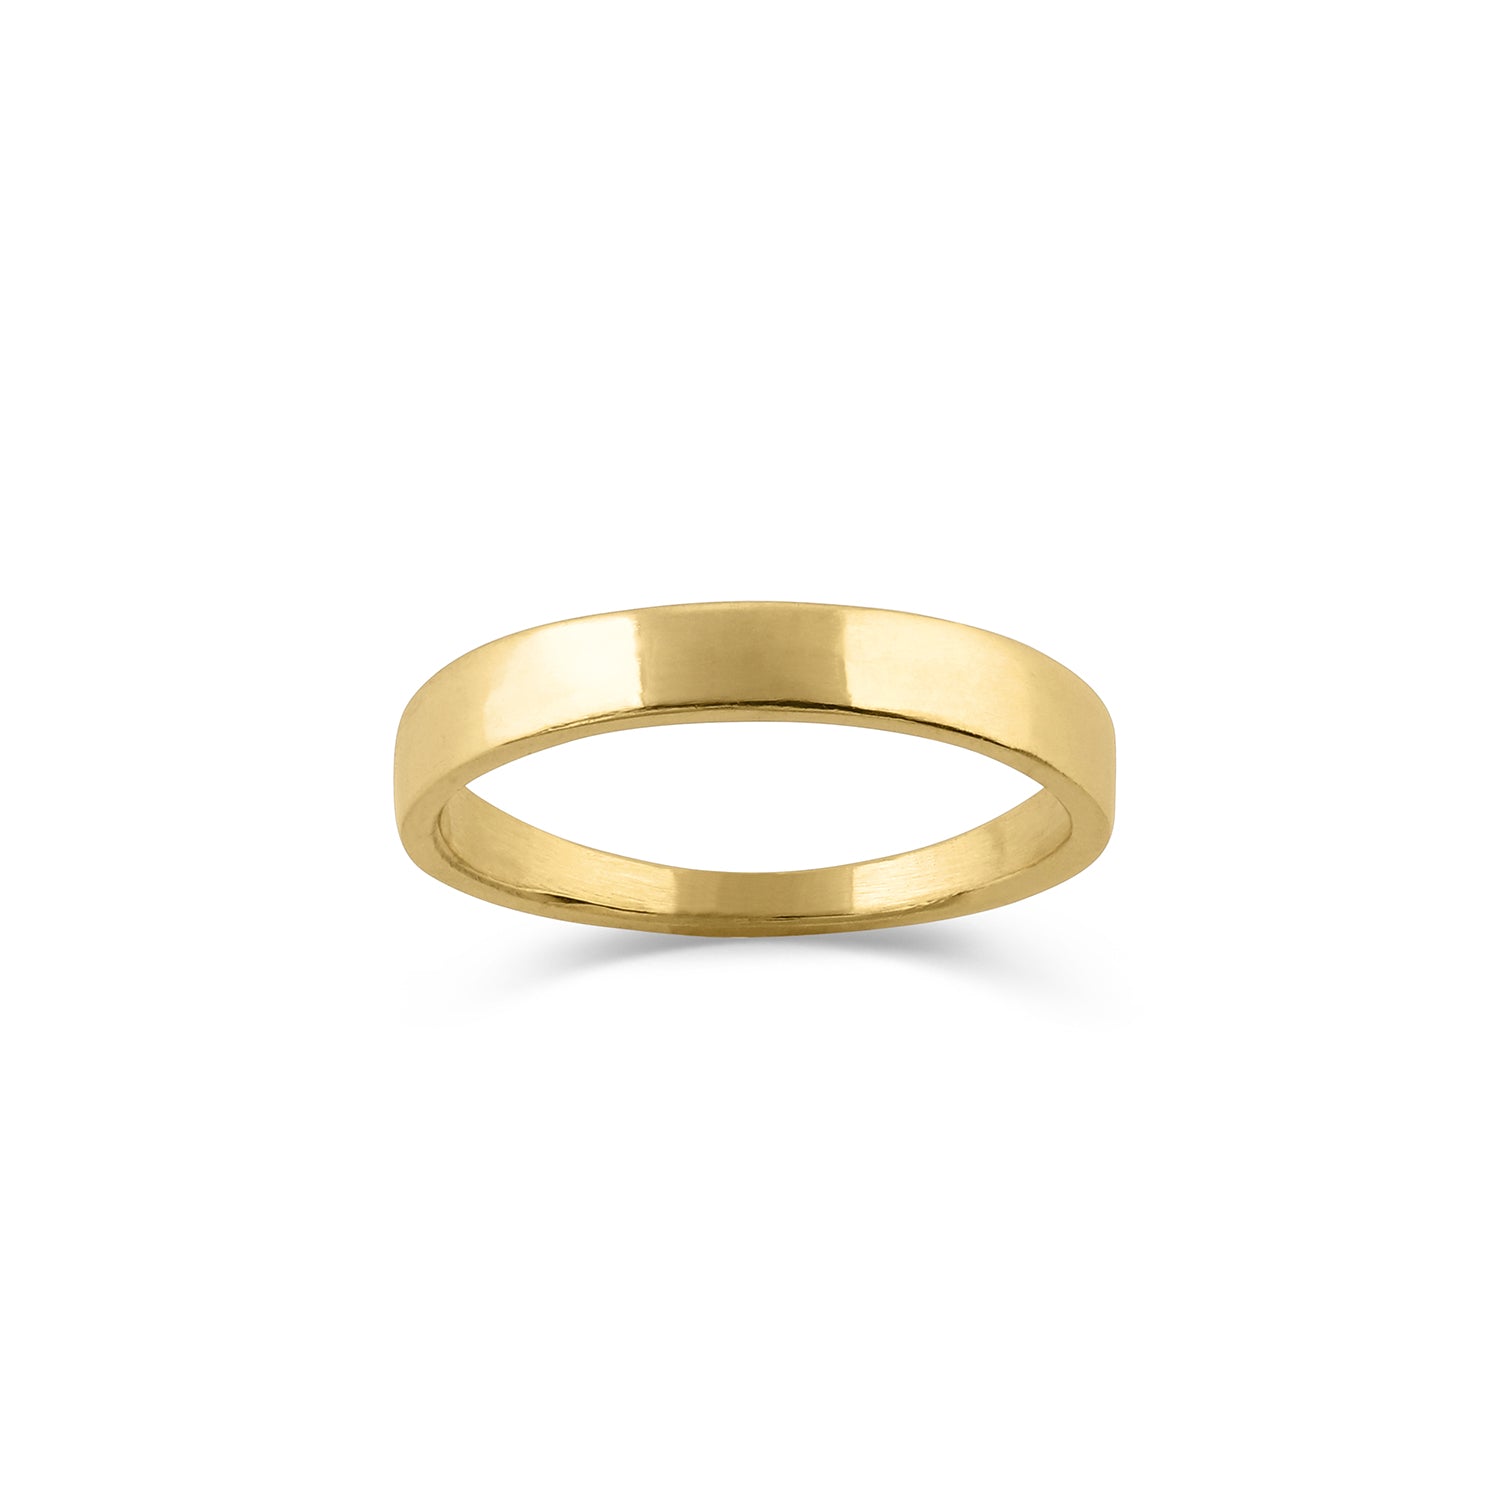 gender neutral bands gender neutral bands 4.5 / 14k yellow gold Tapered Ceremonial Ring